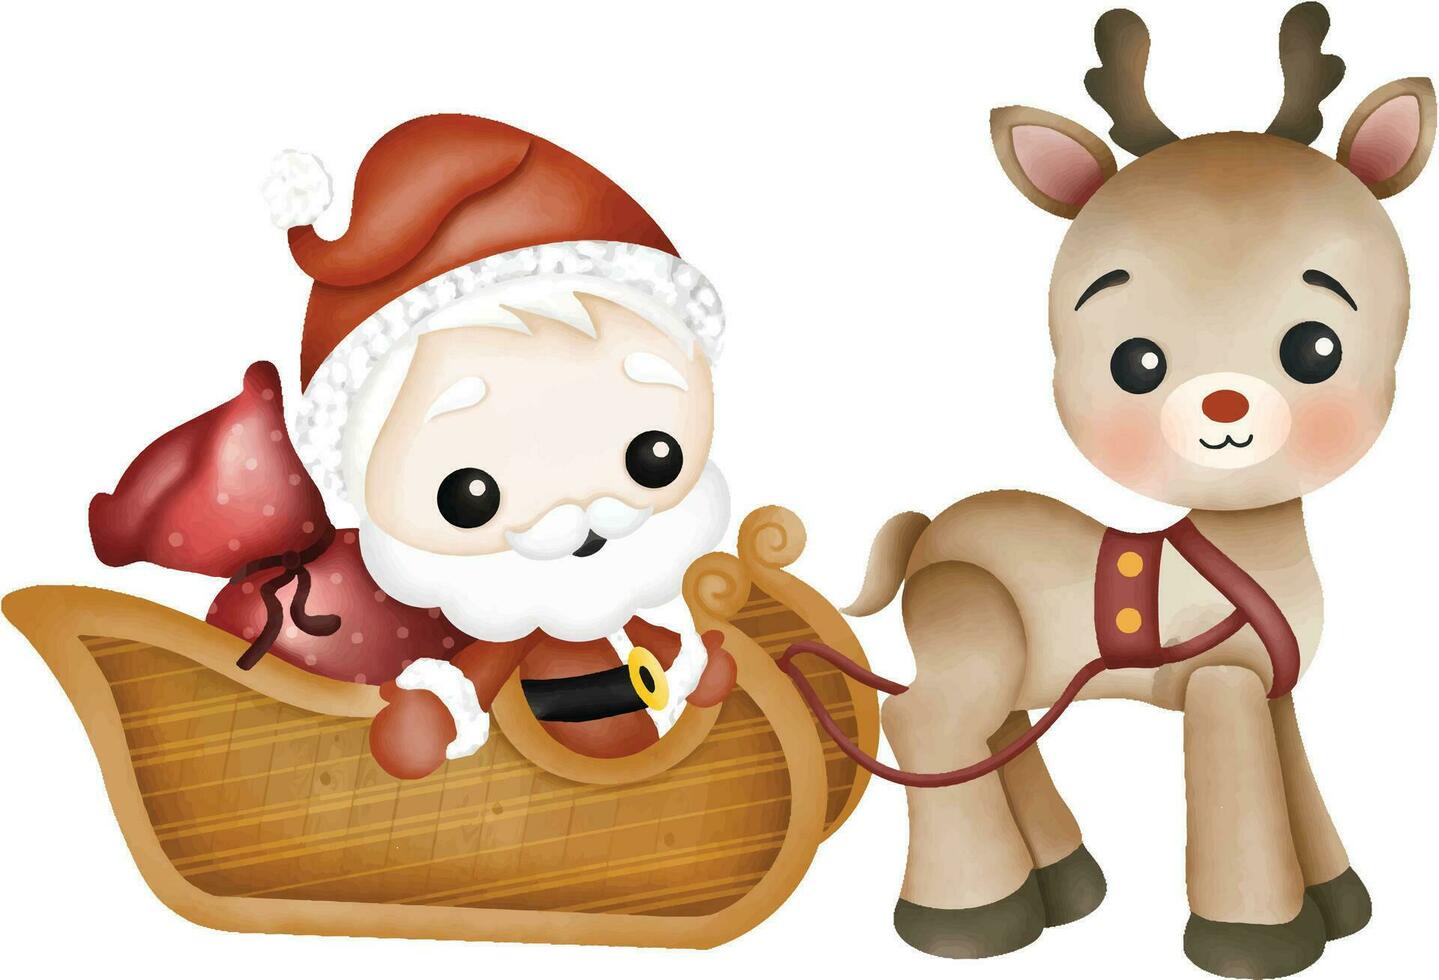 Santa in gift car with reindeer, Christmas illustration vector